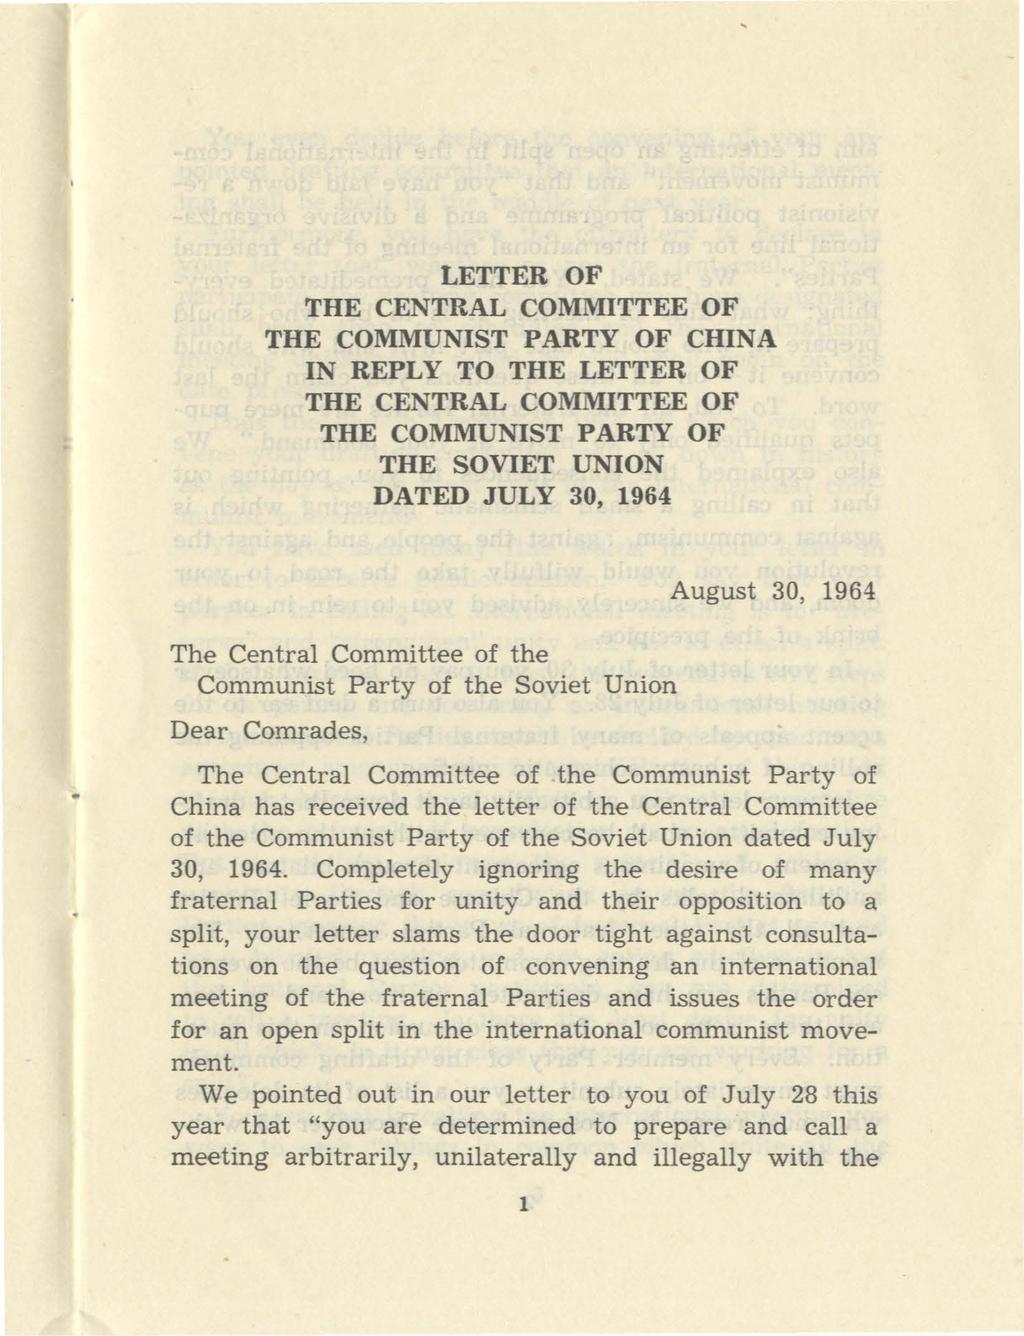 LETTER OF THE CENTRAL COMMITTEE OF THE COMMUNIST PARTY OF CHINA IN REPLY TO THE LETTER OF THE CENTRAL COMMITTEE OF THE COMMUNIST PARTY OF THE SOVIET UNION DATED JULY 30, 1964 August 30, 1964 The